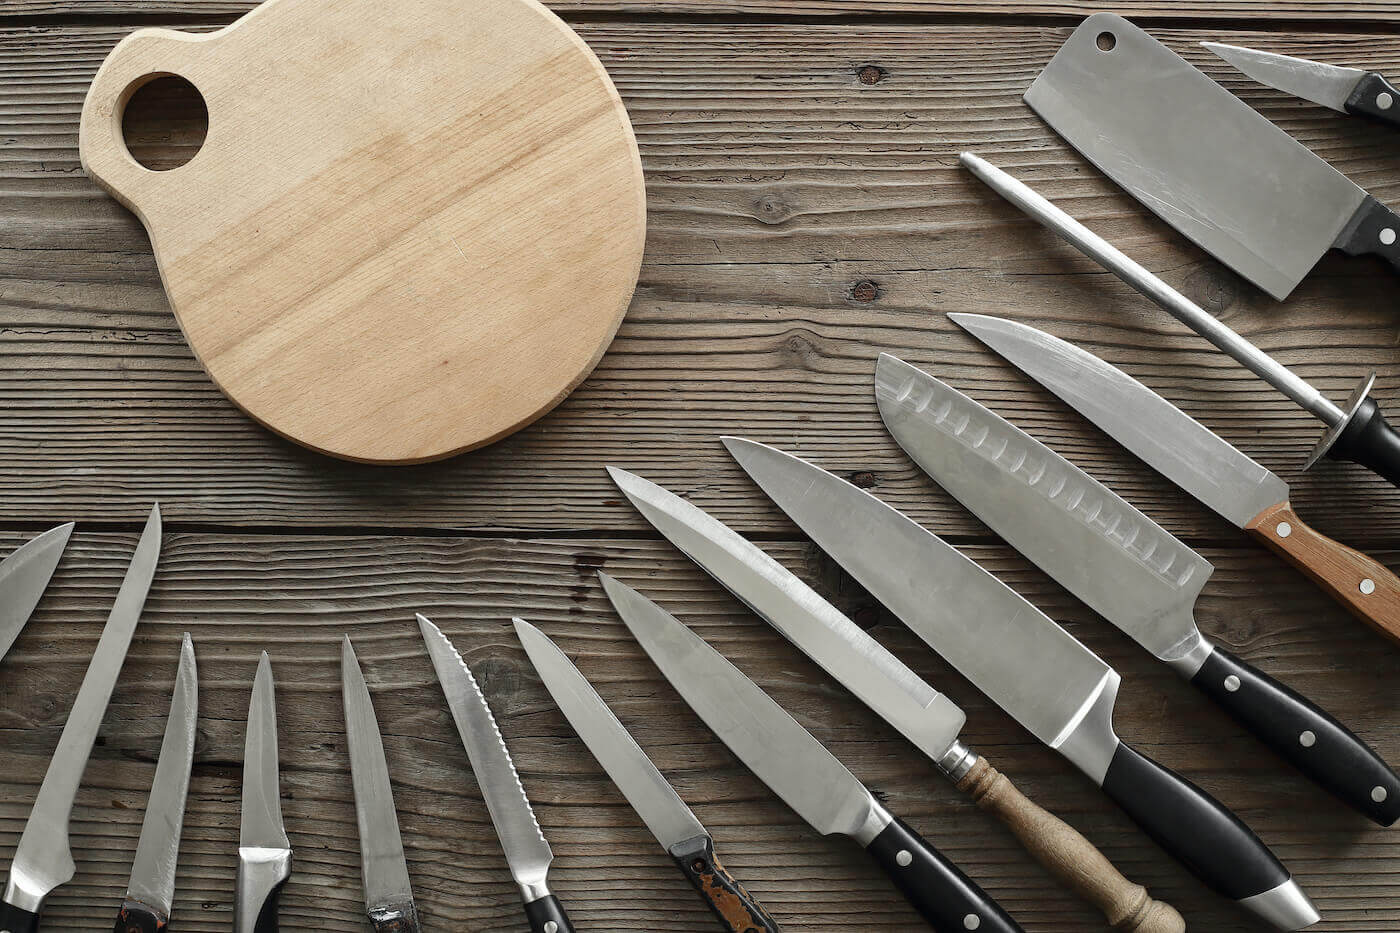 What Knives And Hand Tools Should An Entry-Level Cook Use?